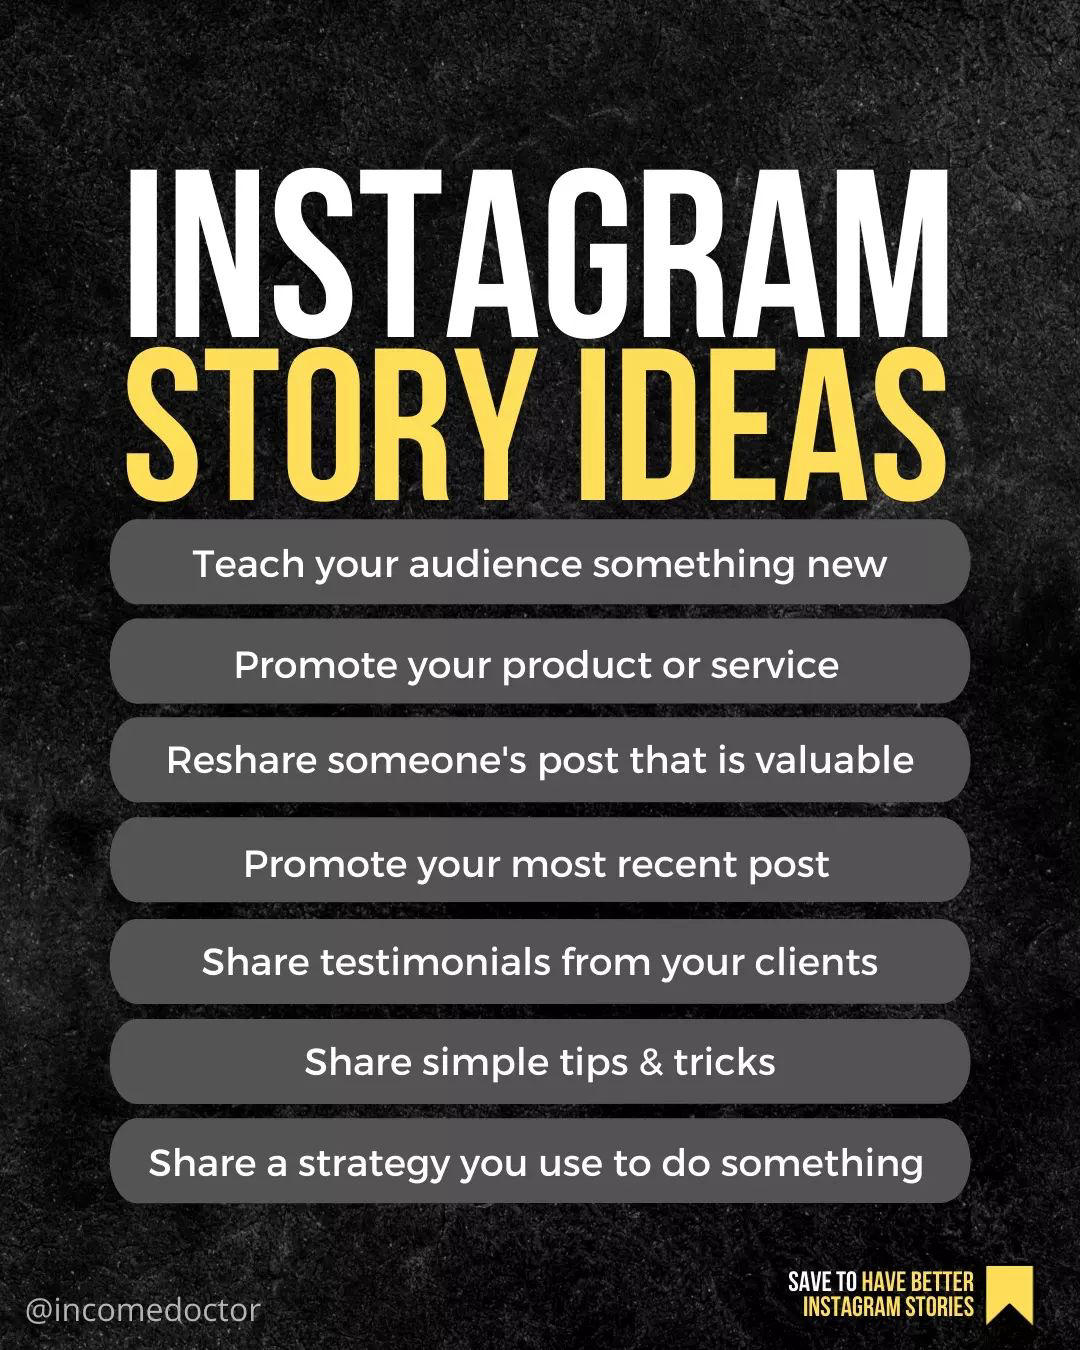 image  1 Vladimir ~ Brand & Design - Instagram Stories are a great way to interact with your audience on Inst